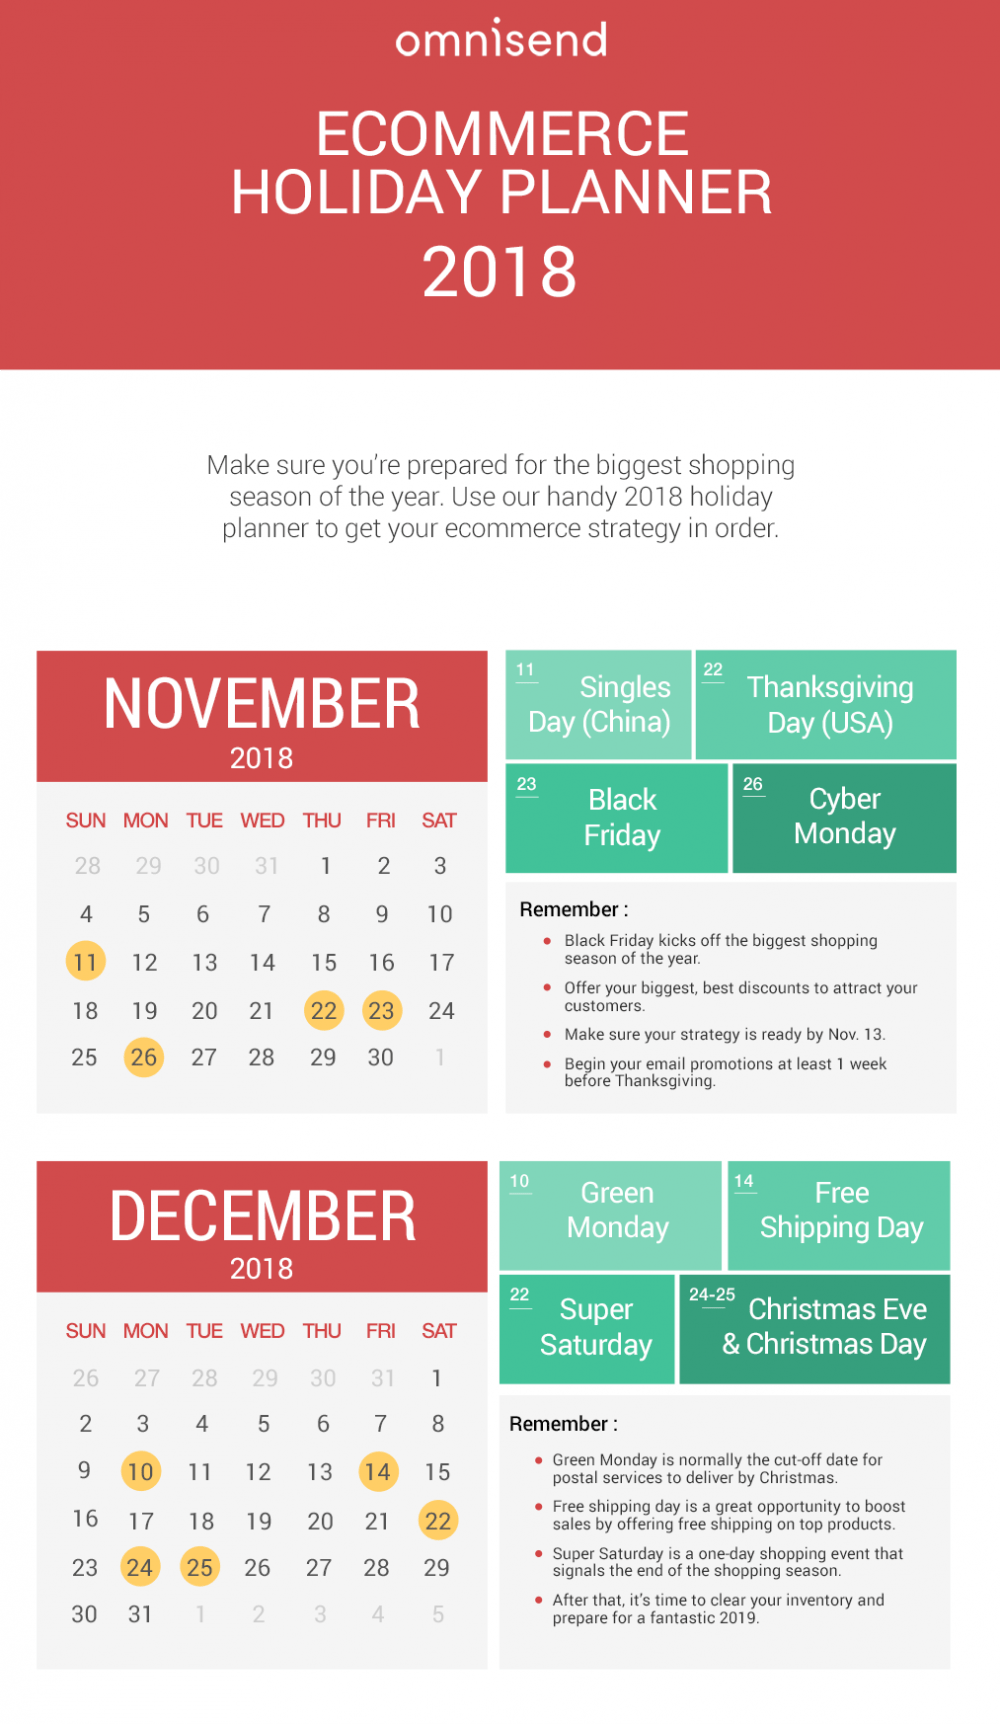 Use our holiday ecommerce planner infographic to set your ecommerce strategy today